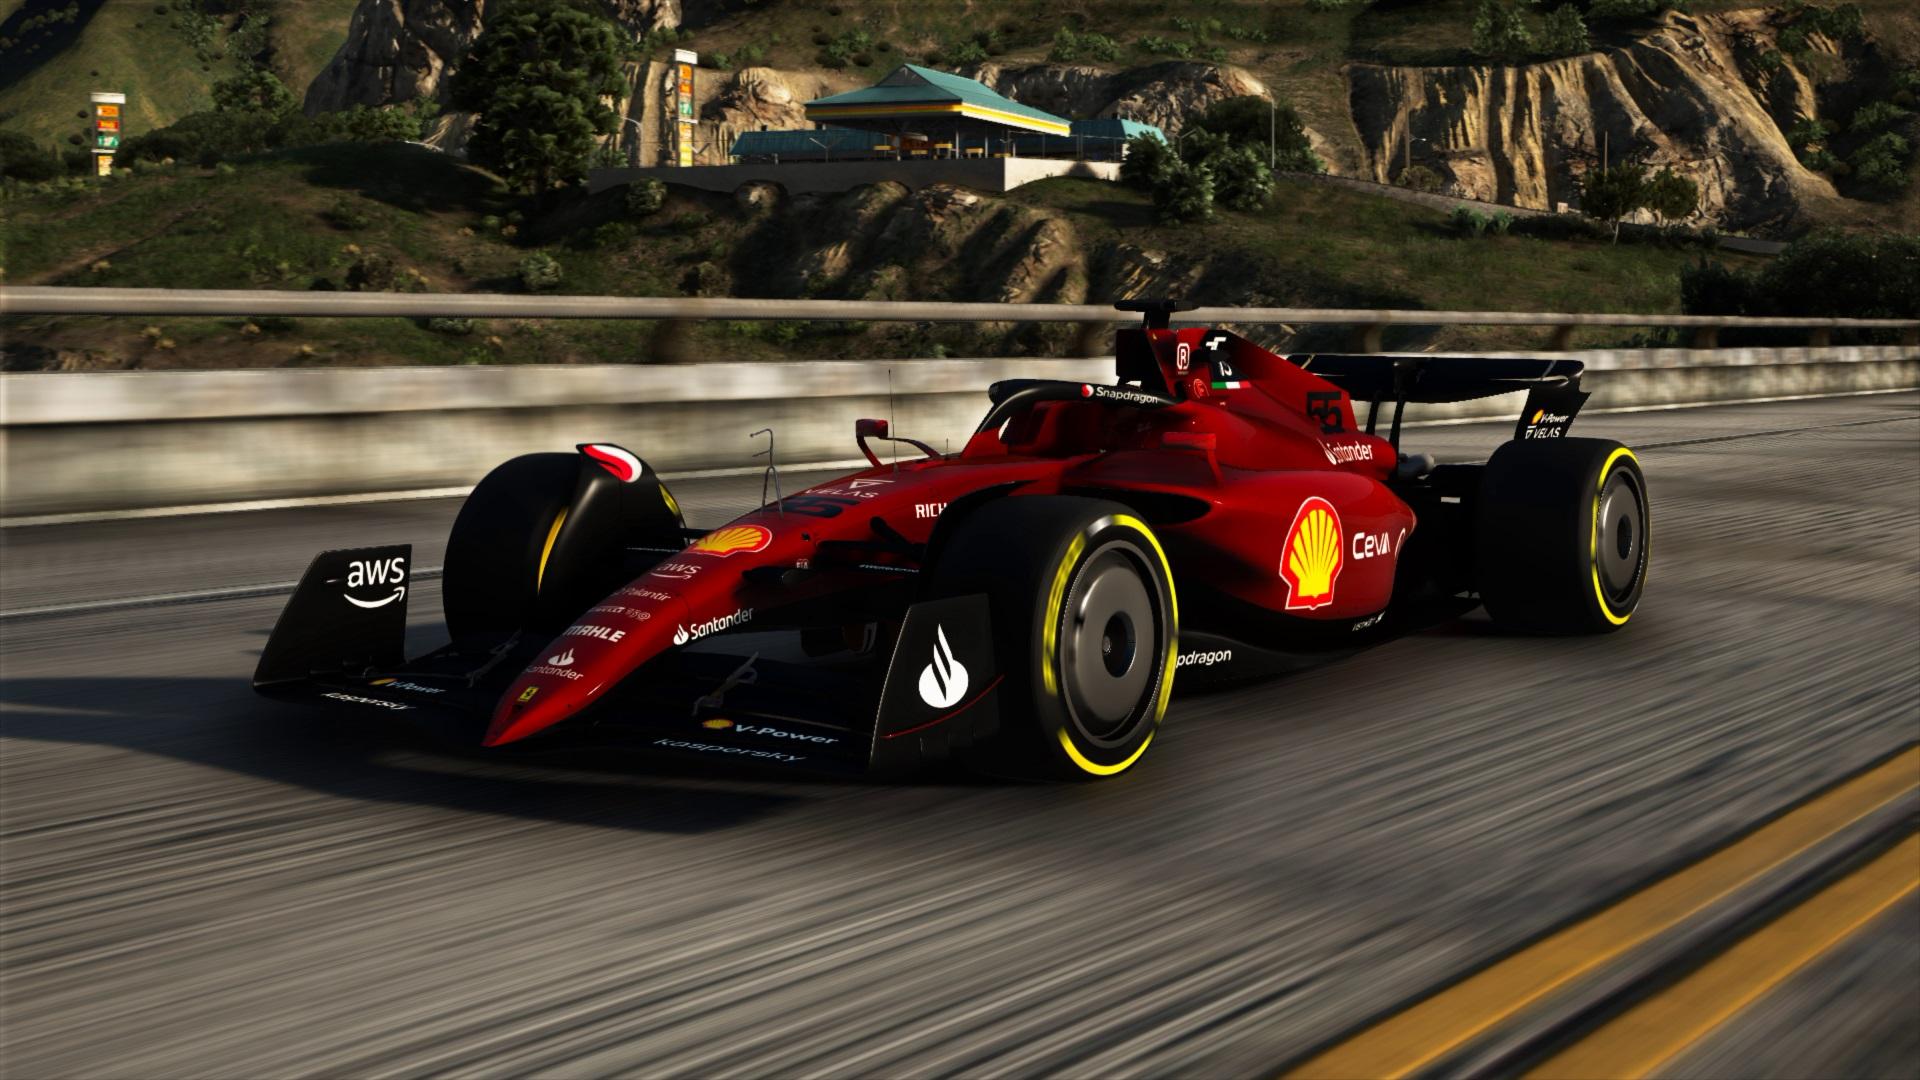 How To Download & Install Mods On F1 22 